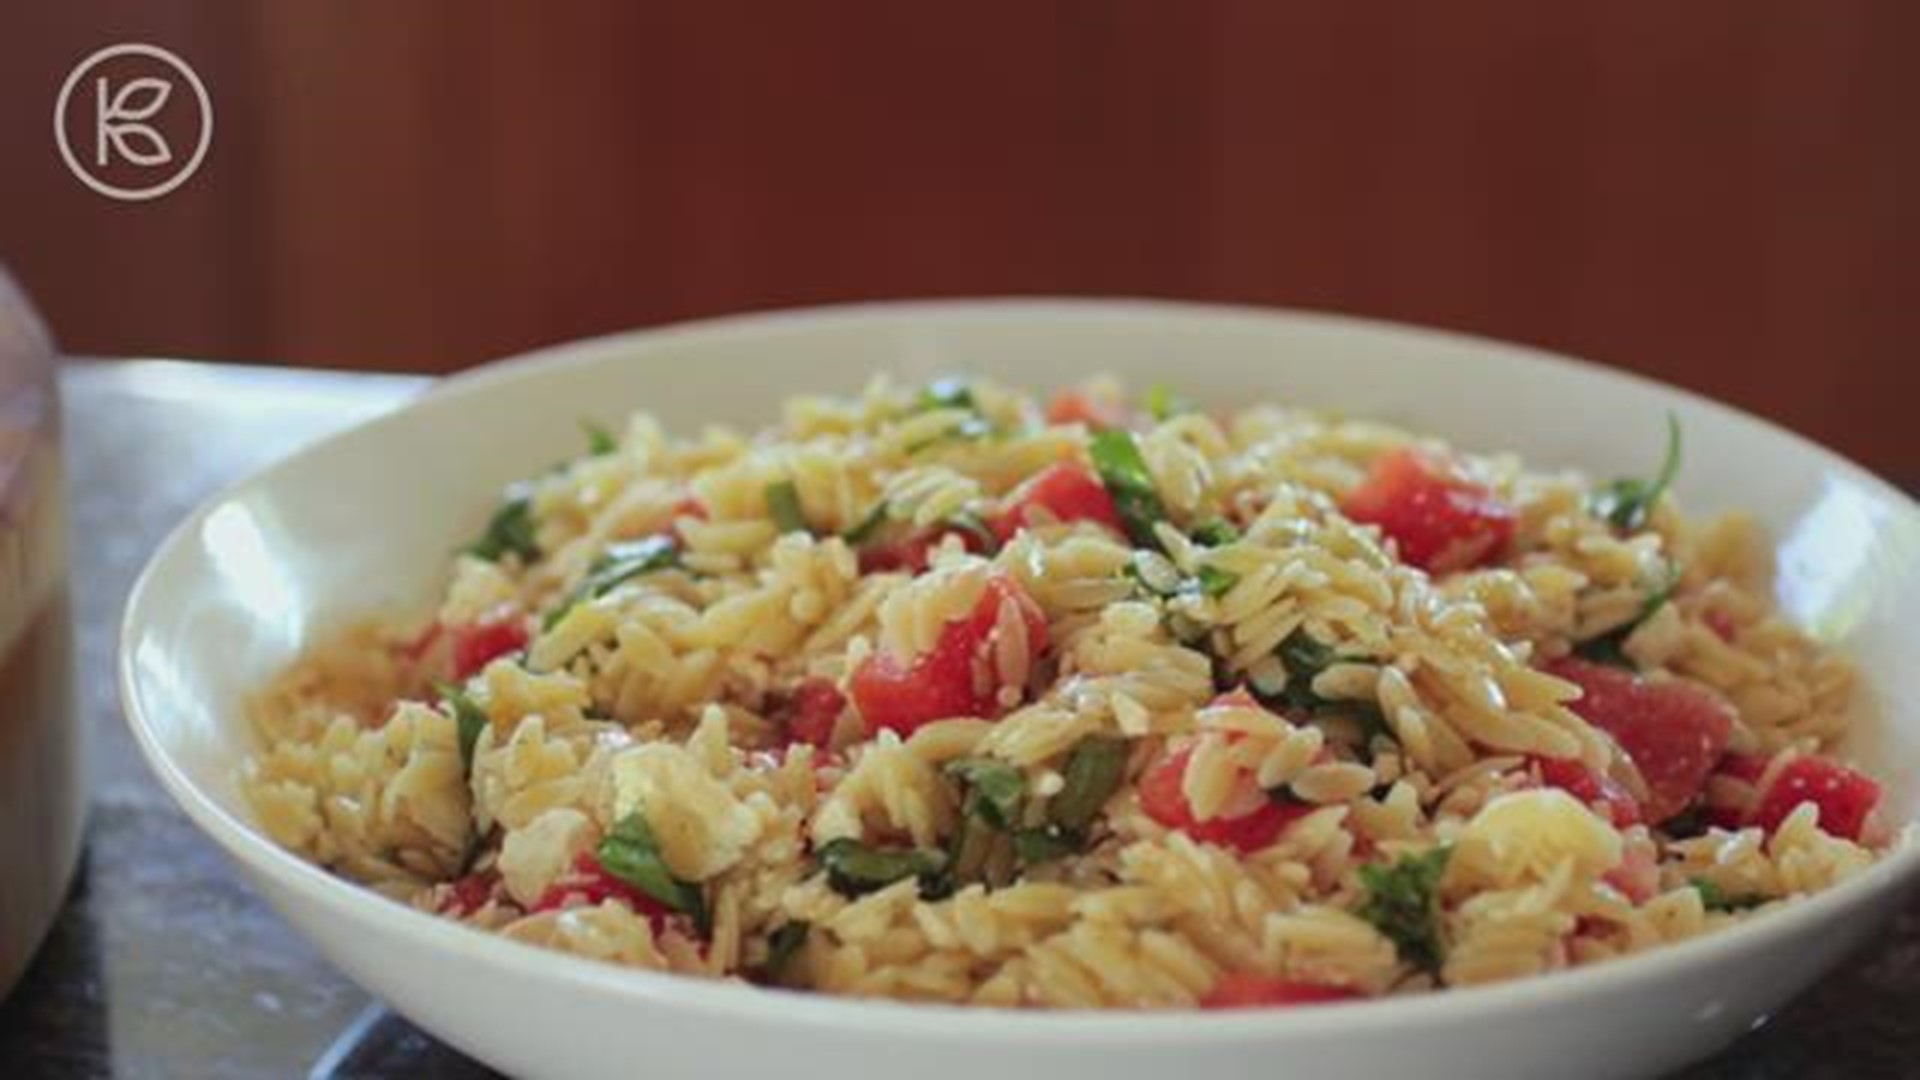  This orzo salad with sweet watermelon, salty feta and fresh basil is a refreshing, delicious side dish for any meal. Make it at your next summer BBQ...your guests will LOVE it!